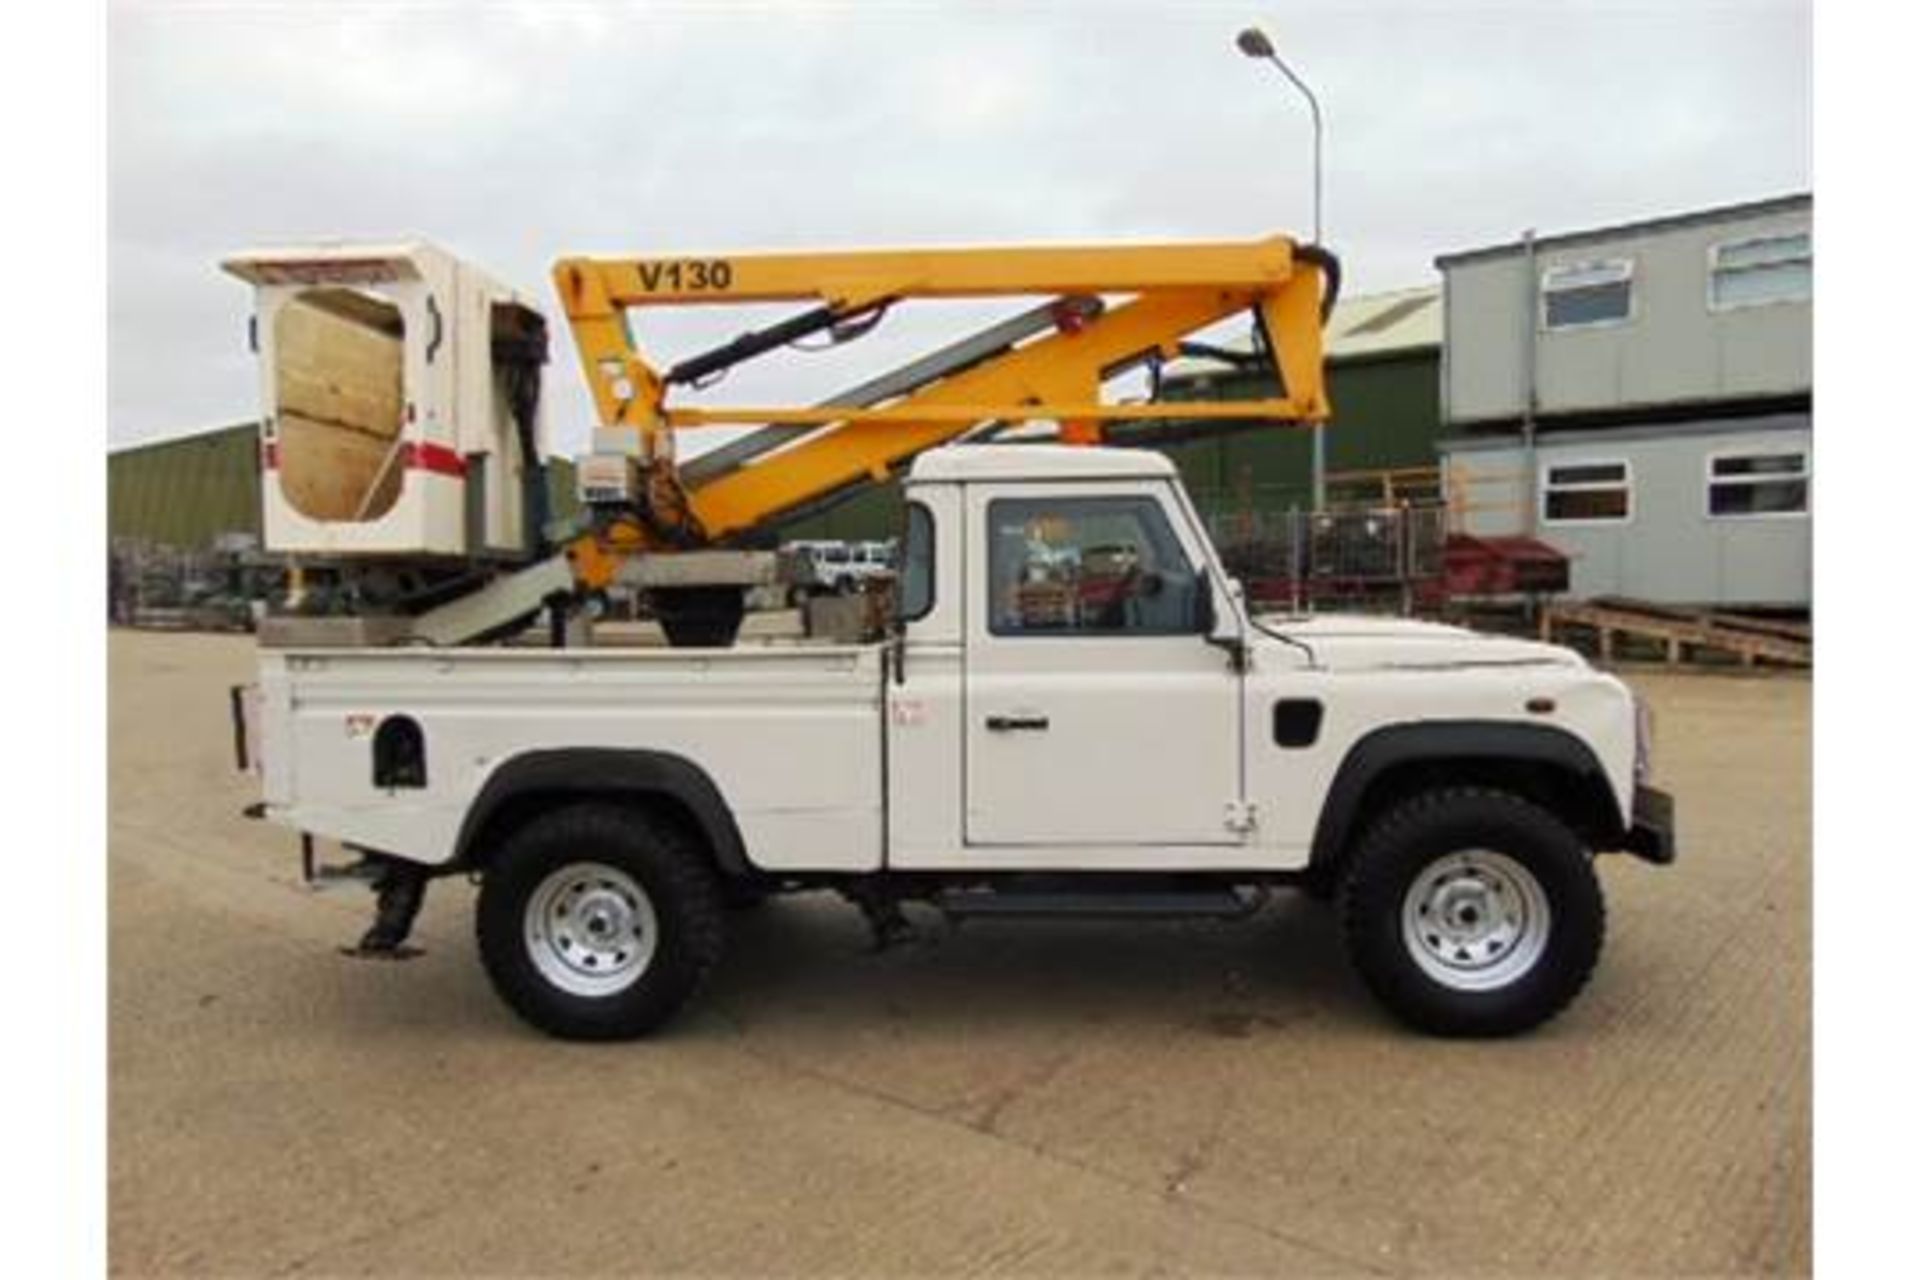 Land Rover Defender 110 High Capacity Cherry Picker - Image 8 of 34